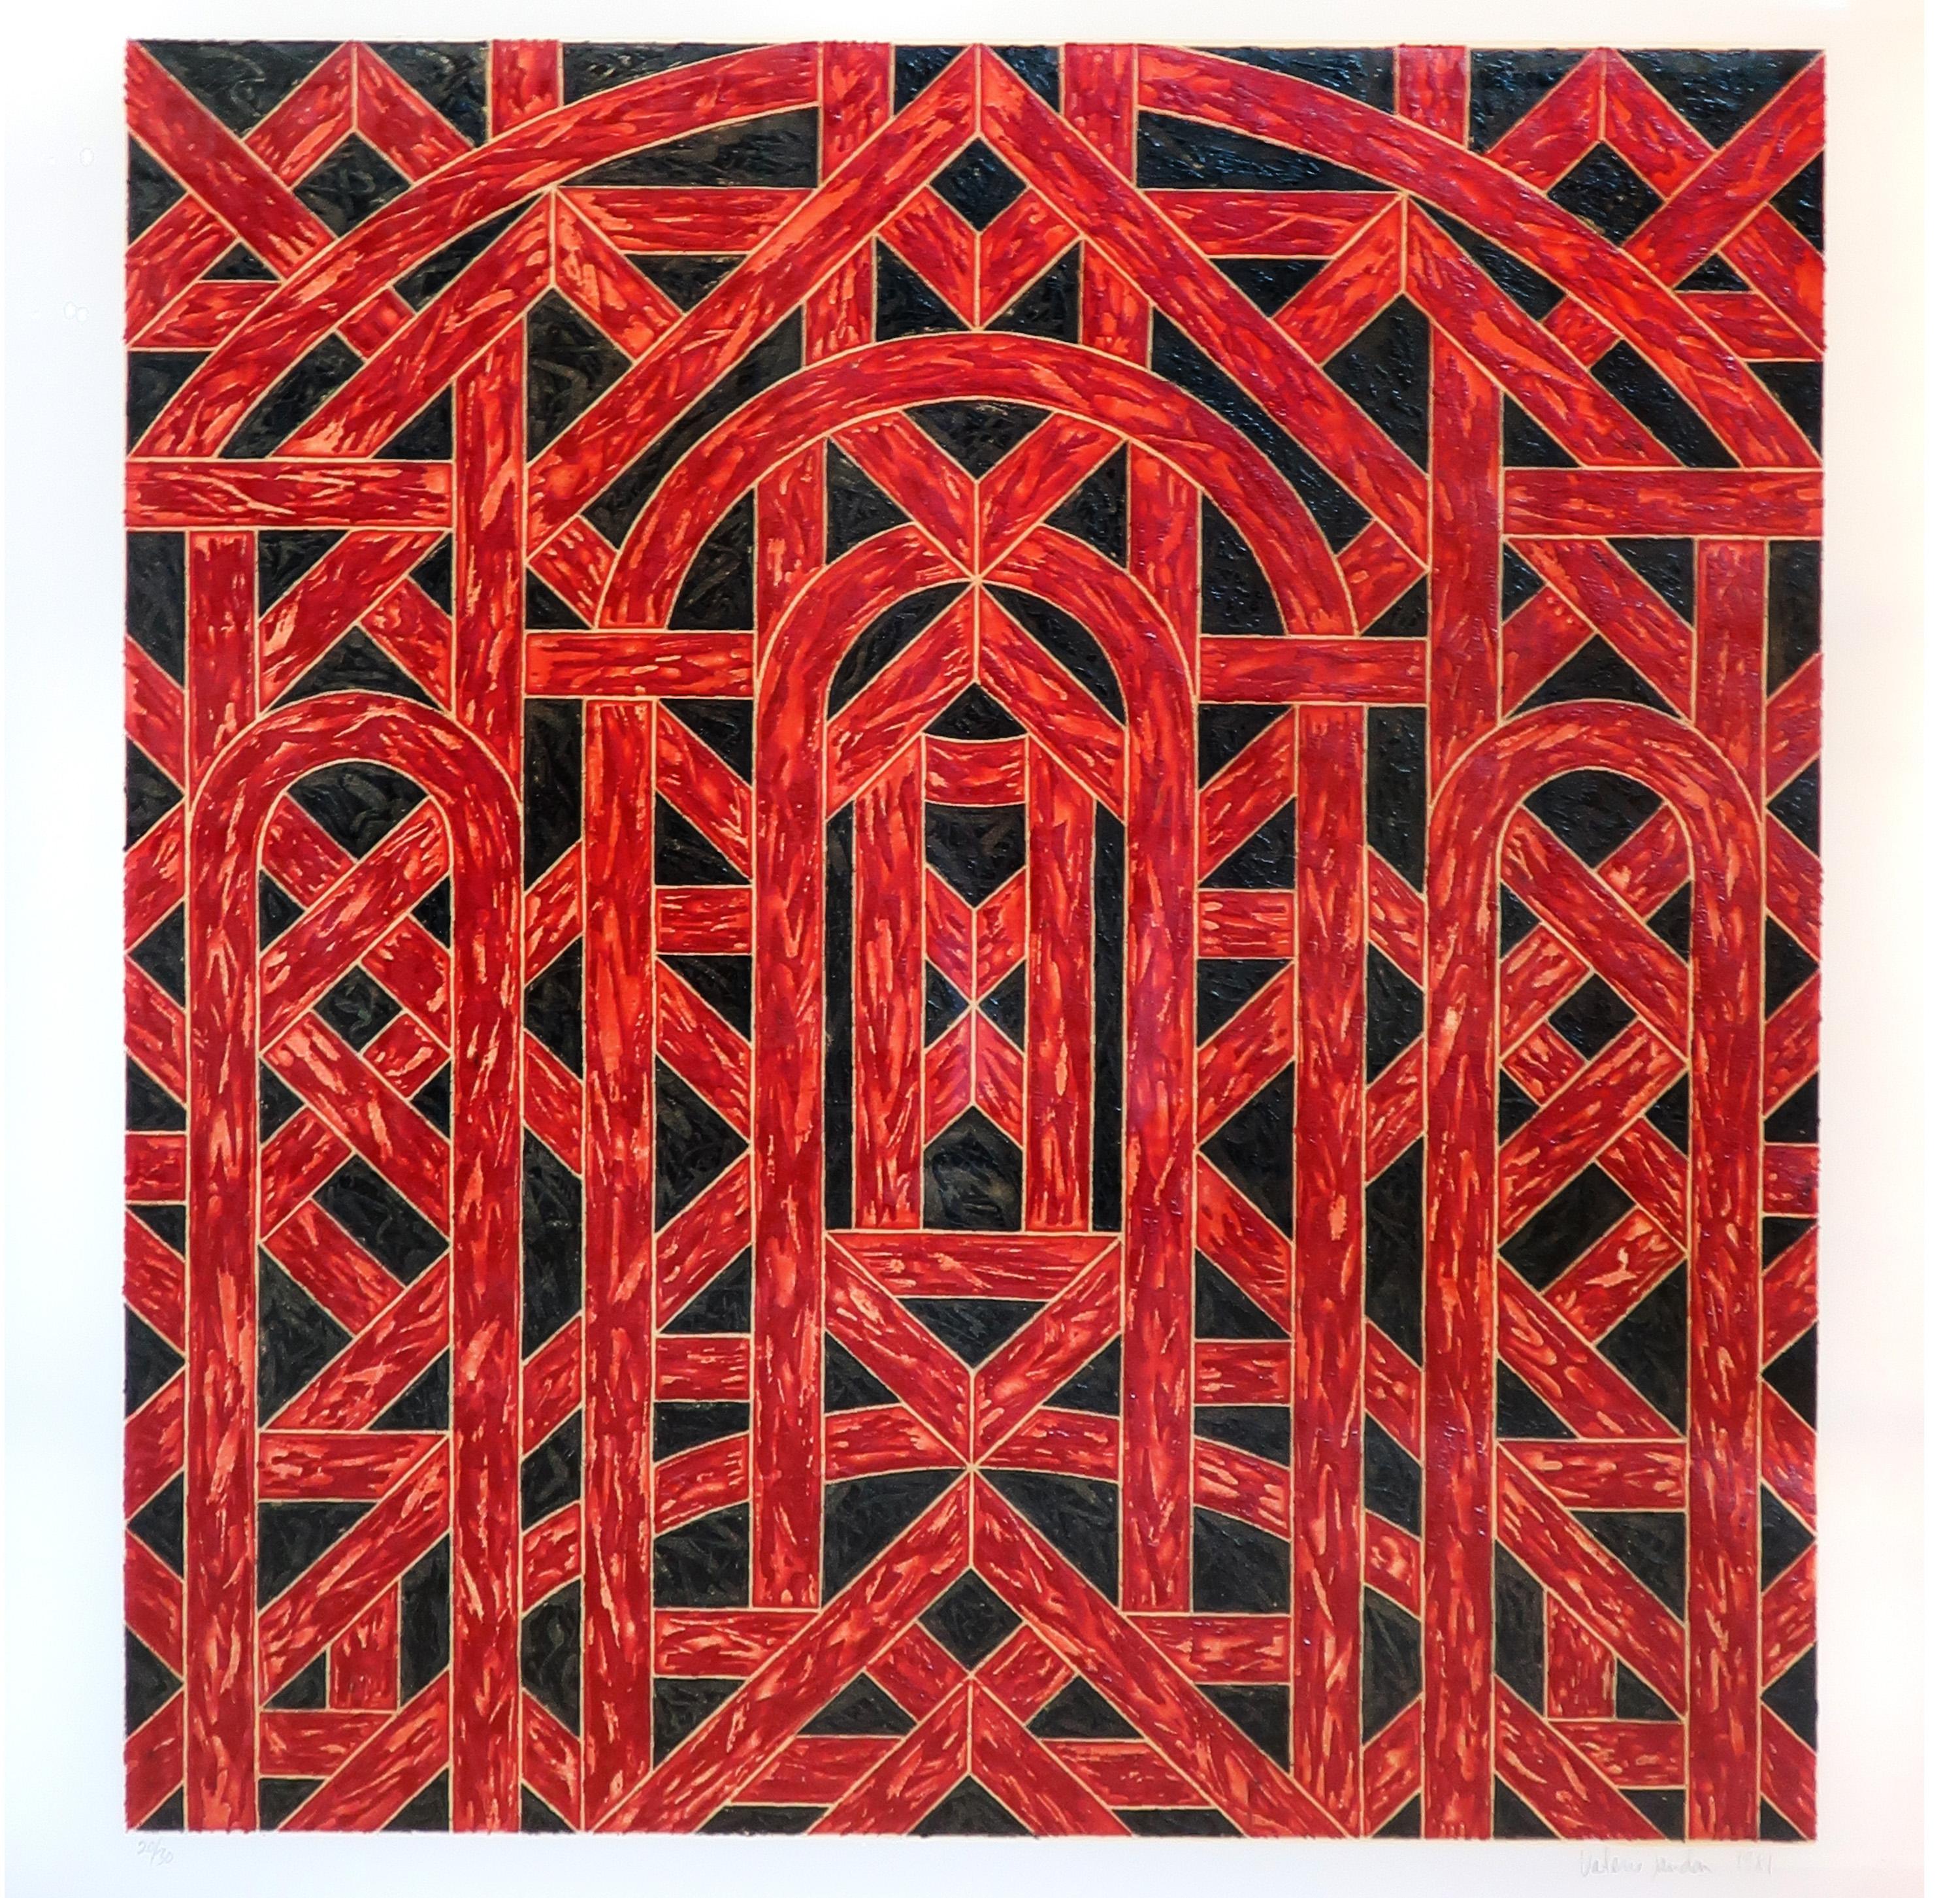 A lovely black, red, and off-white abstract etched design by Valerie Jaudon (b. 1945), most famous for her role in the Pattern and Decoration Movement of the mid-1970s. Jaudon's work evokes motifs and the embellishments of folk art, decorative arts,